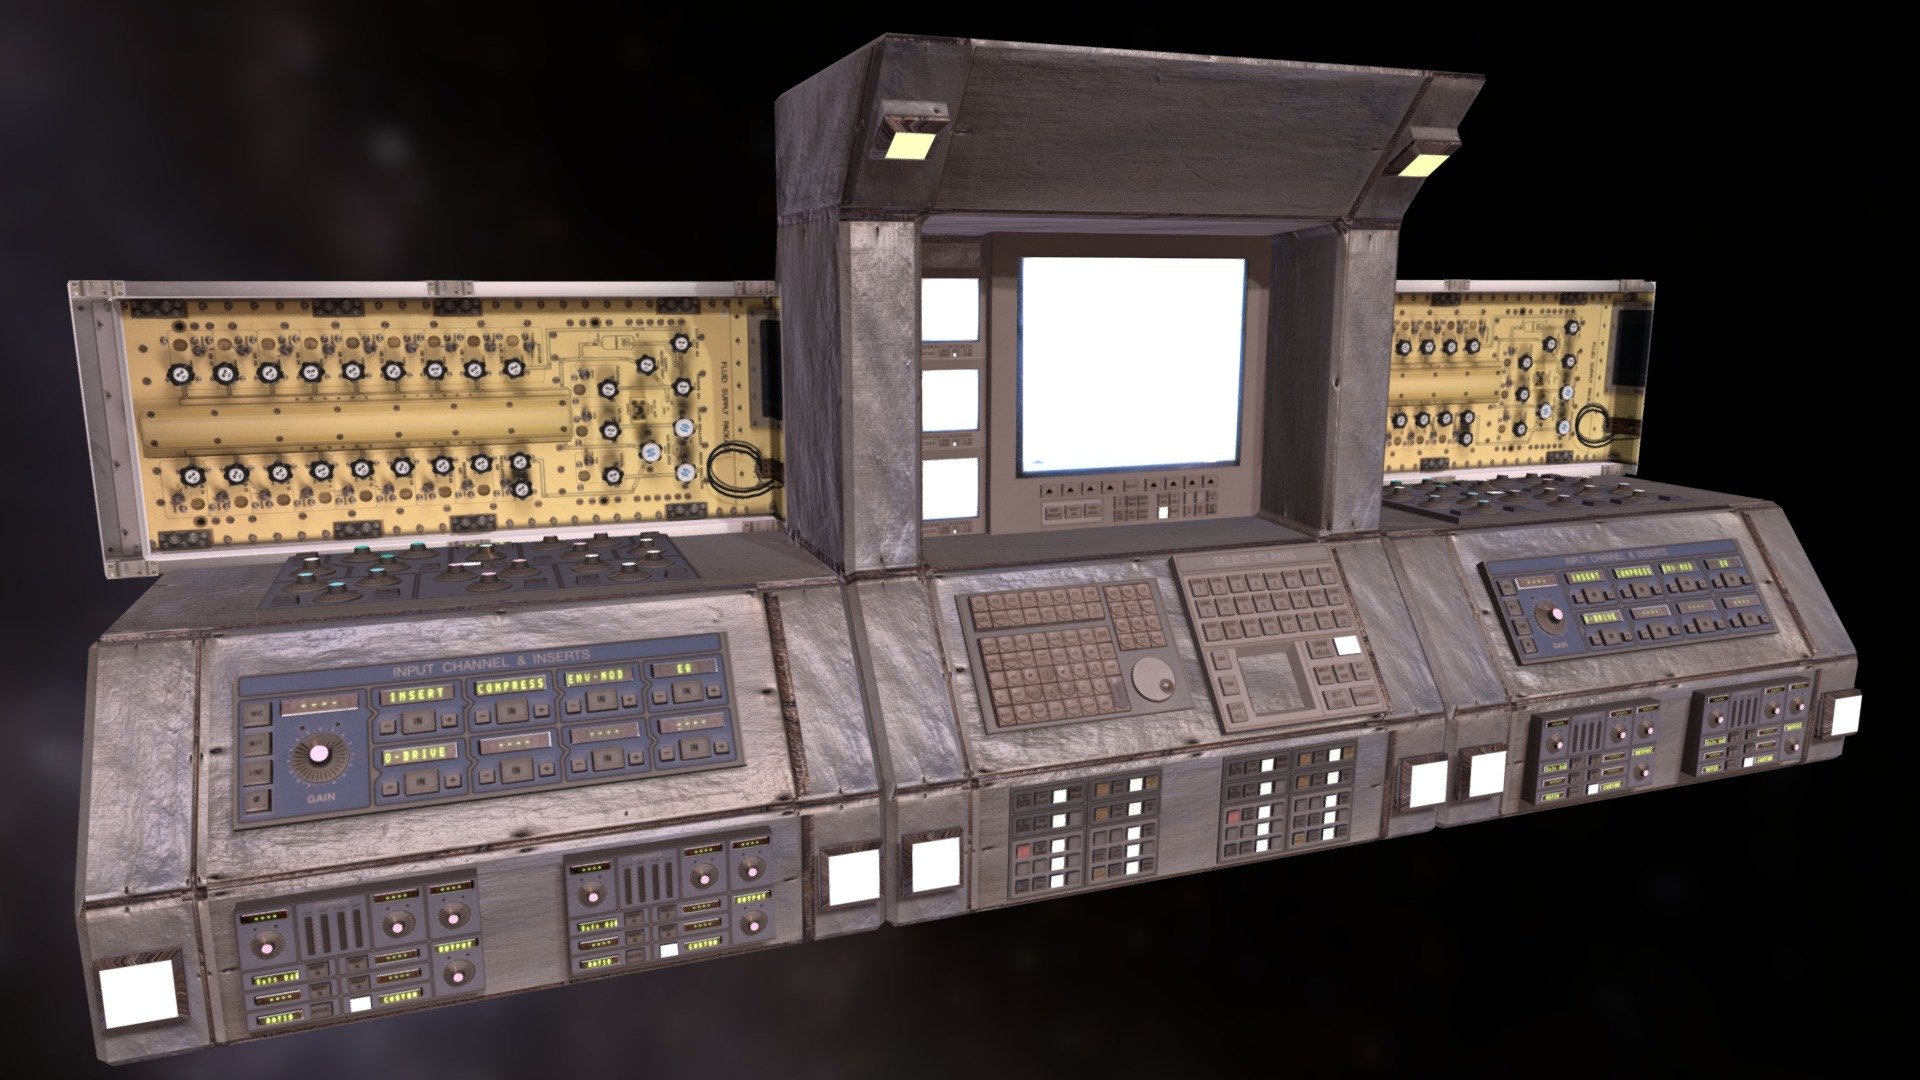 Computer Retro Super Machine PBR Electronics -Low Poly -4k Textures -UV Unwrapped NON Overlapping -Aligned to 0/0/0 X,Y,Z -Uses 5 Textures includes Normal Map for Metal Material -PBR Game Ready Mobile - Desktop - Console Unlimited Support!

Modelled Rendered in Blender Cycles 2.76 - Computer Retro Super Machine PBR Electronics - Buy Royalty Free 3D model by BehrtronStudios 3d model